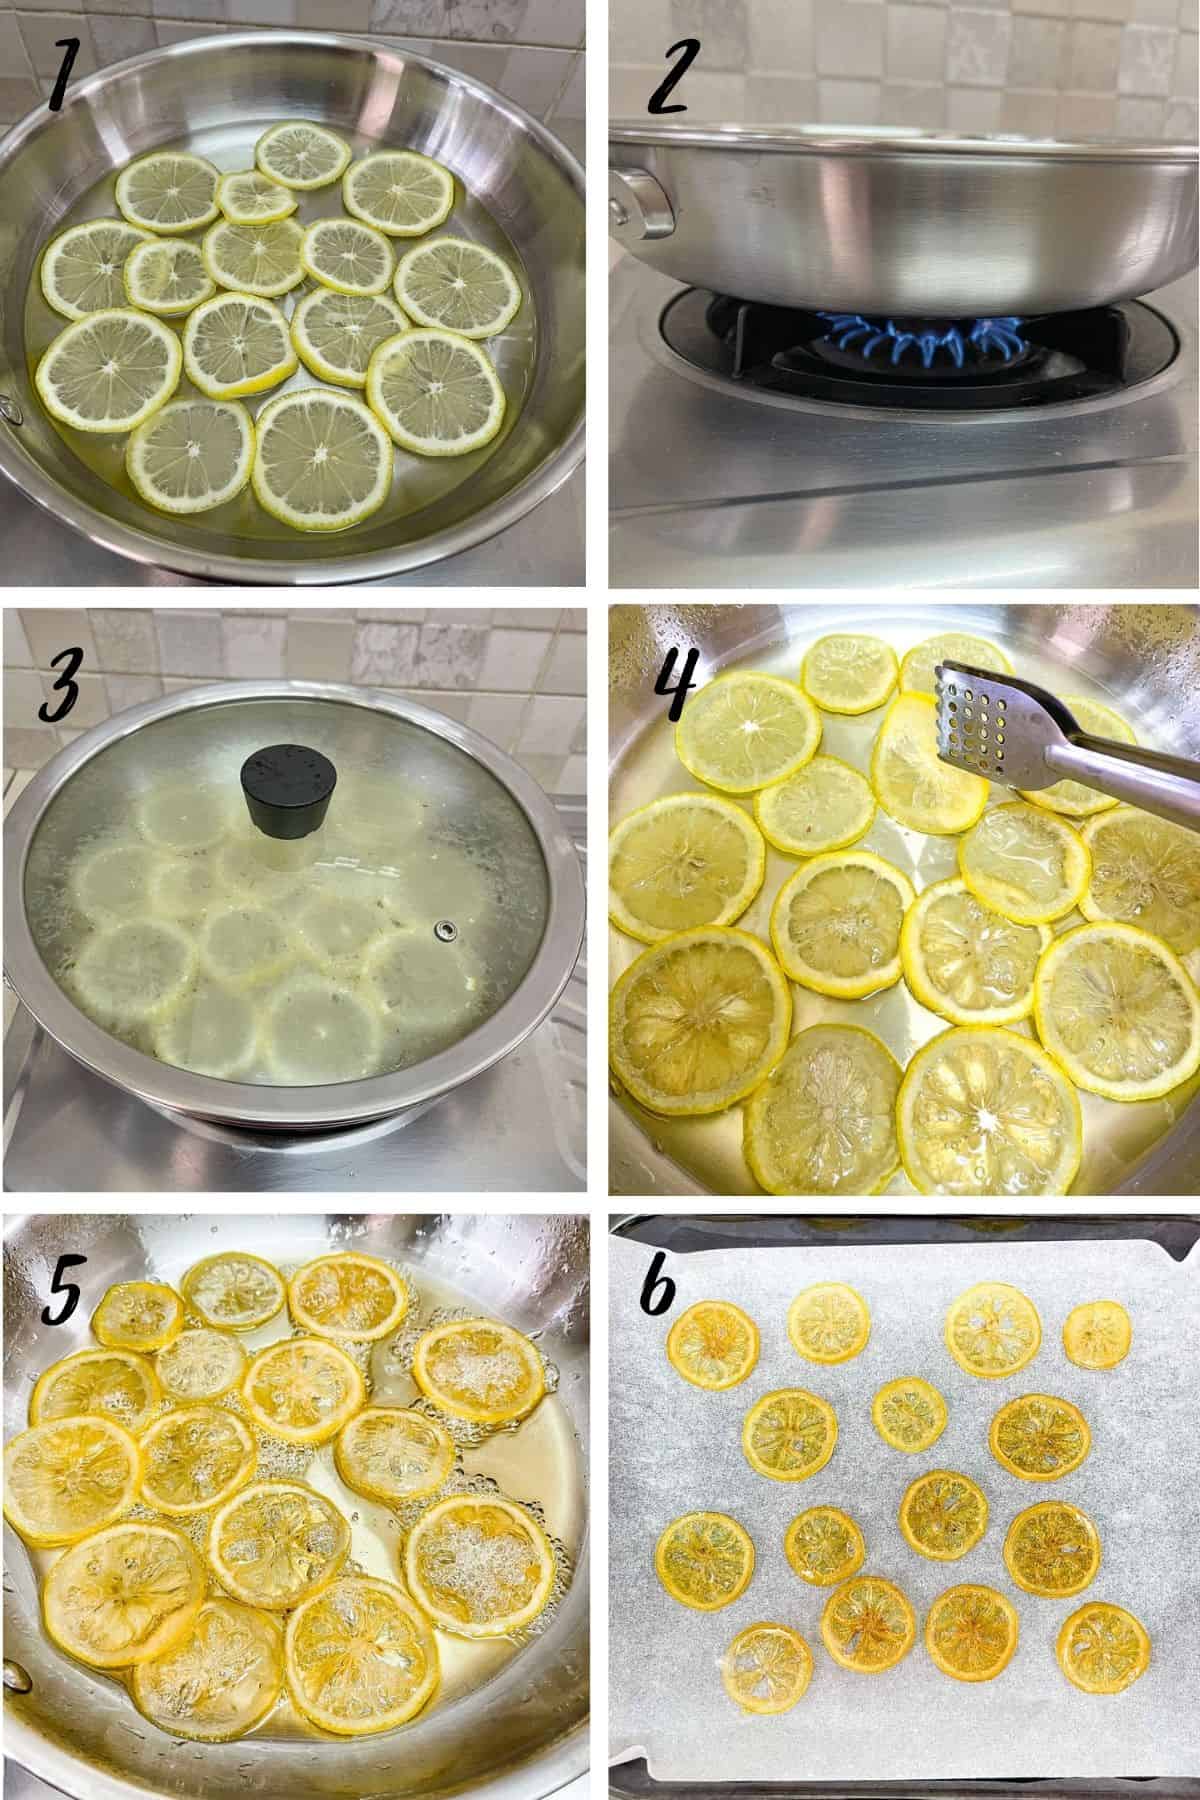 A poster of 6 images showing how to make candied lemon slices